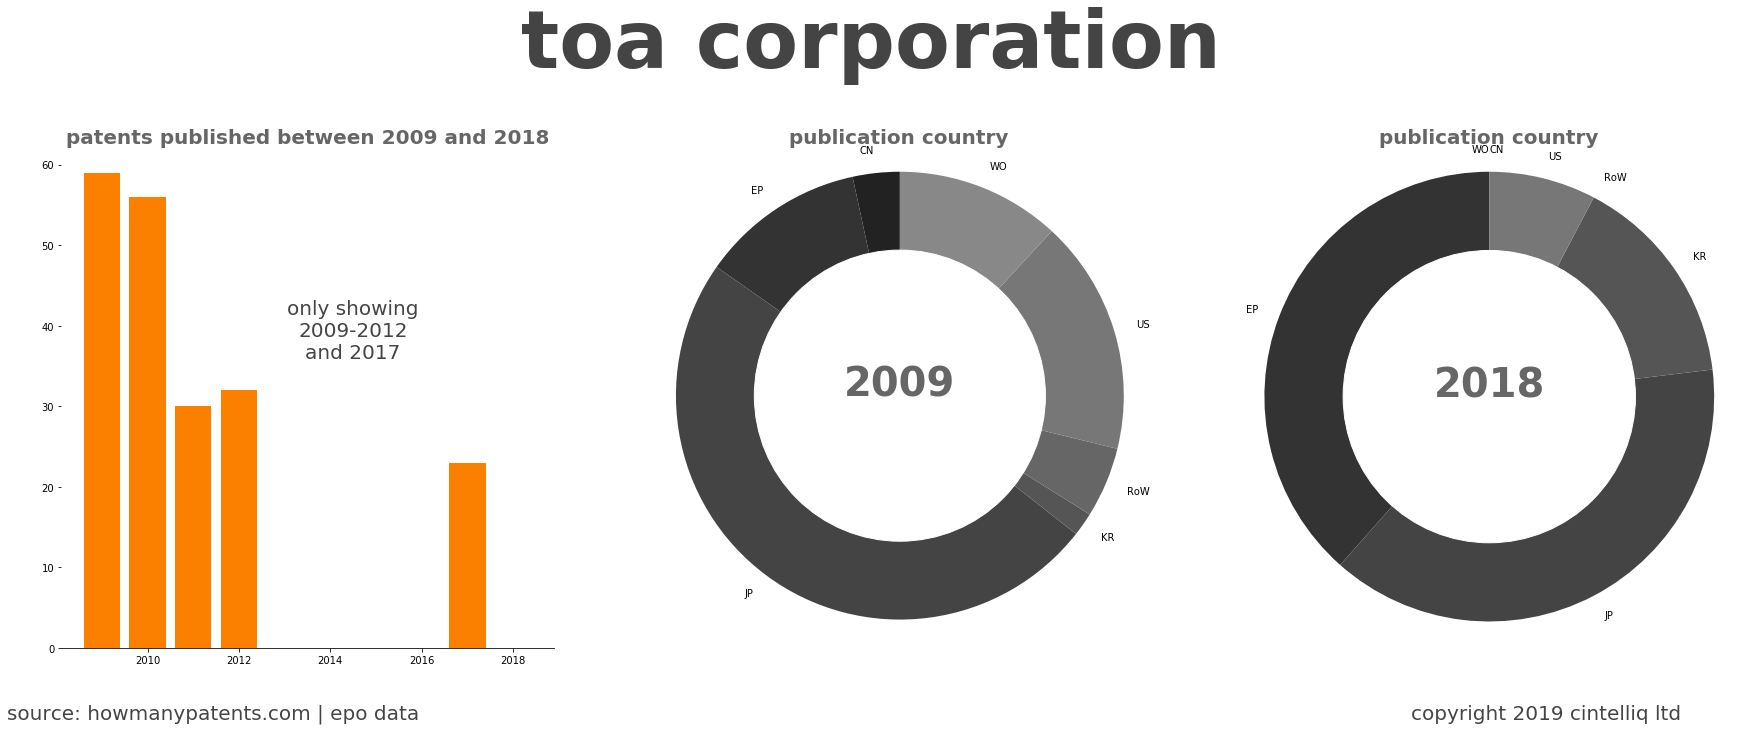 summary of patents for Toa Corporation